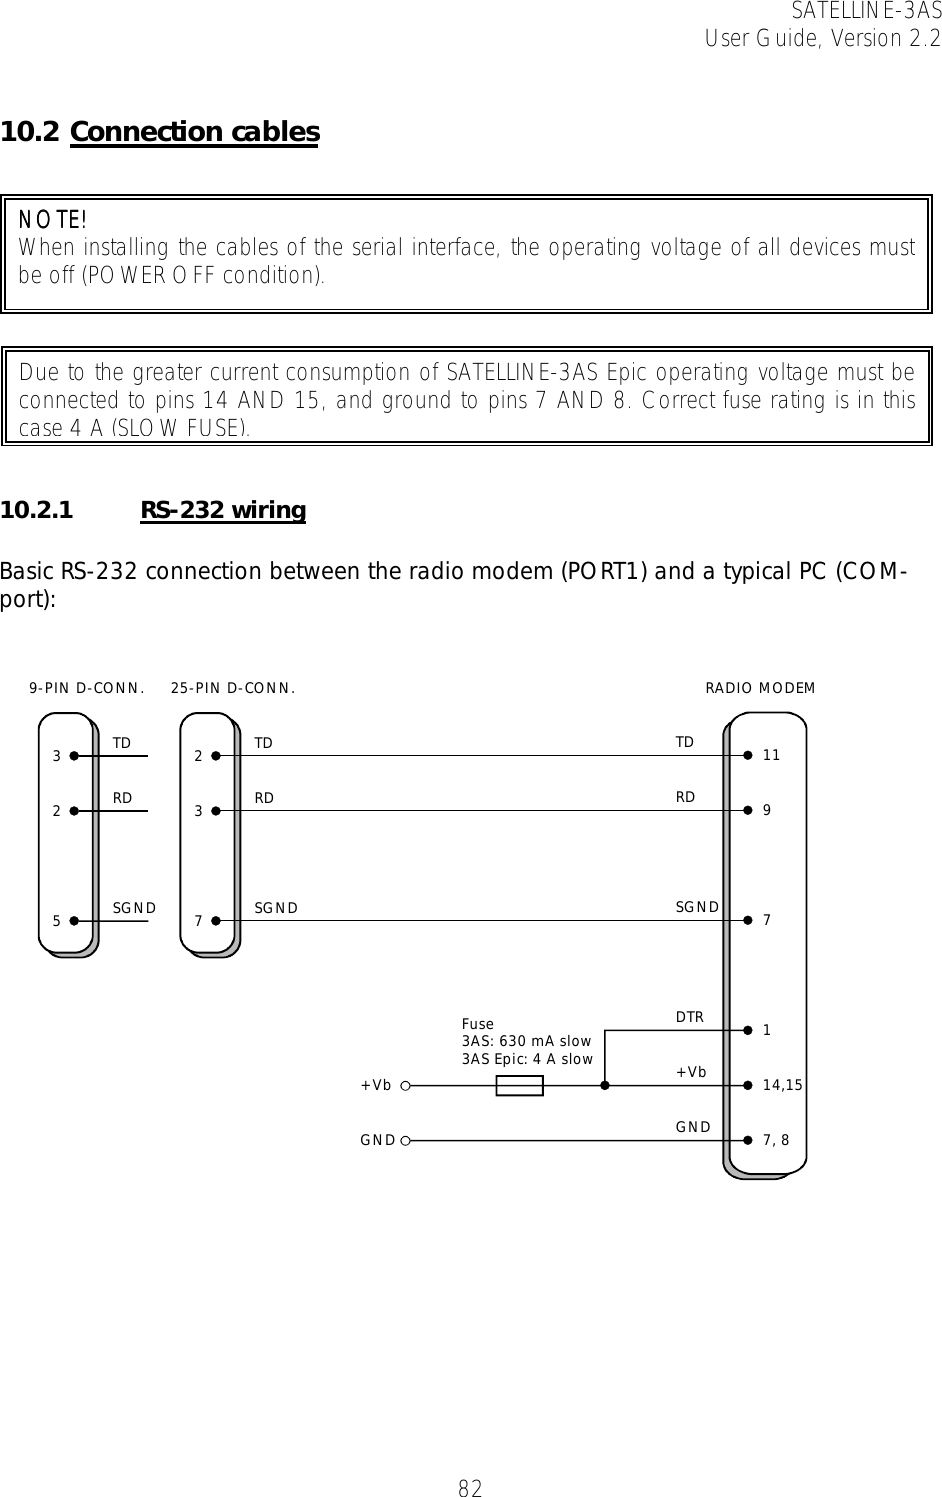 SATELLINE-3AS User Guide, Version 2.2   82  10.2 Connection cables    10.2.1 RS-232 wiring   Basic RS-232 connection between the radio modem (PORT1) and a typical PC (COM-port):    NOTE! NOTE! NOTE! NOTE!     When installing the cables of the serial interface, the operating voltage of all devices must be off (POWER OFF condition).  Due to the greater current consumption of SATELLINE-3AS Epic operating voltage must be connected to pins 14 AND 15, and ground to pins 7 AND 8. Correct fuse rating is in thiscase 4 A (SLOW FUSE).325TDRDSGND9-PIN D-CONN.237TDRDSGND25-PIN D-CONN.TDRDSGND11RADIO MODEM97114,157, 8DTR+VbGND+VbGNDFuse 3AS: 630 mA slow3AS Epic: 4 A slow